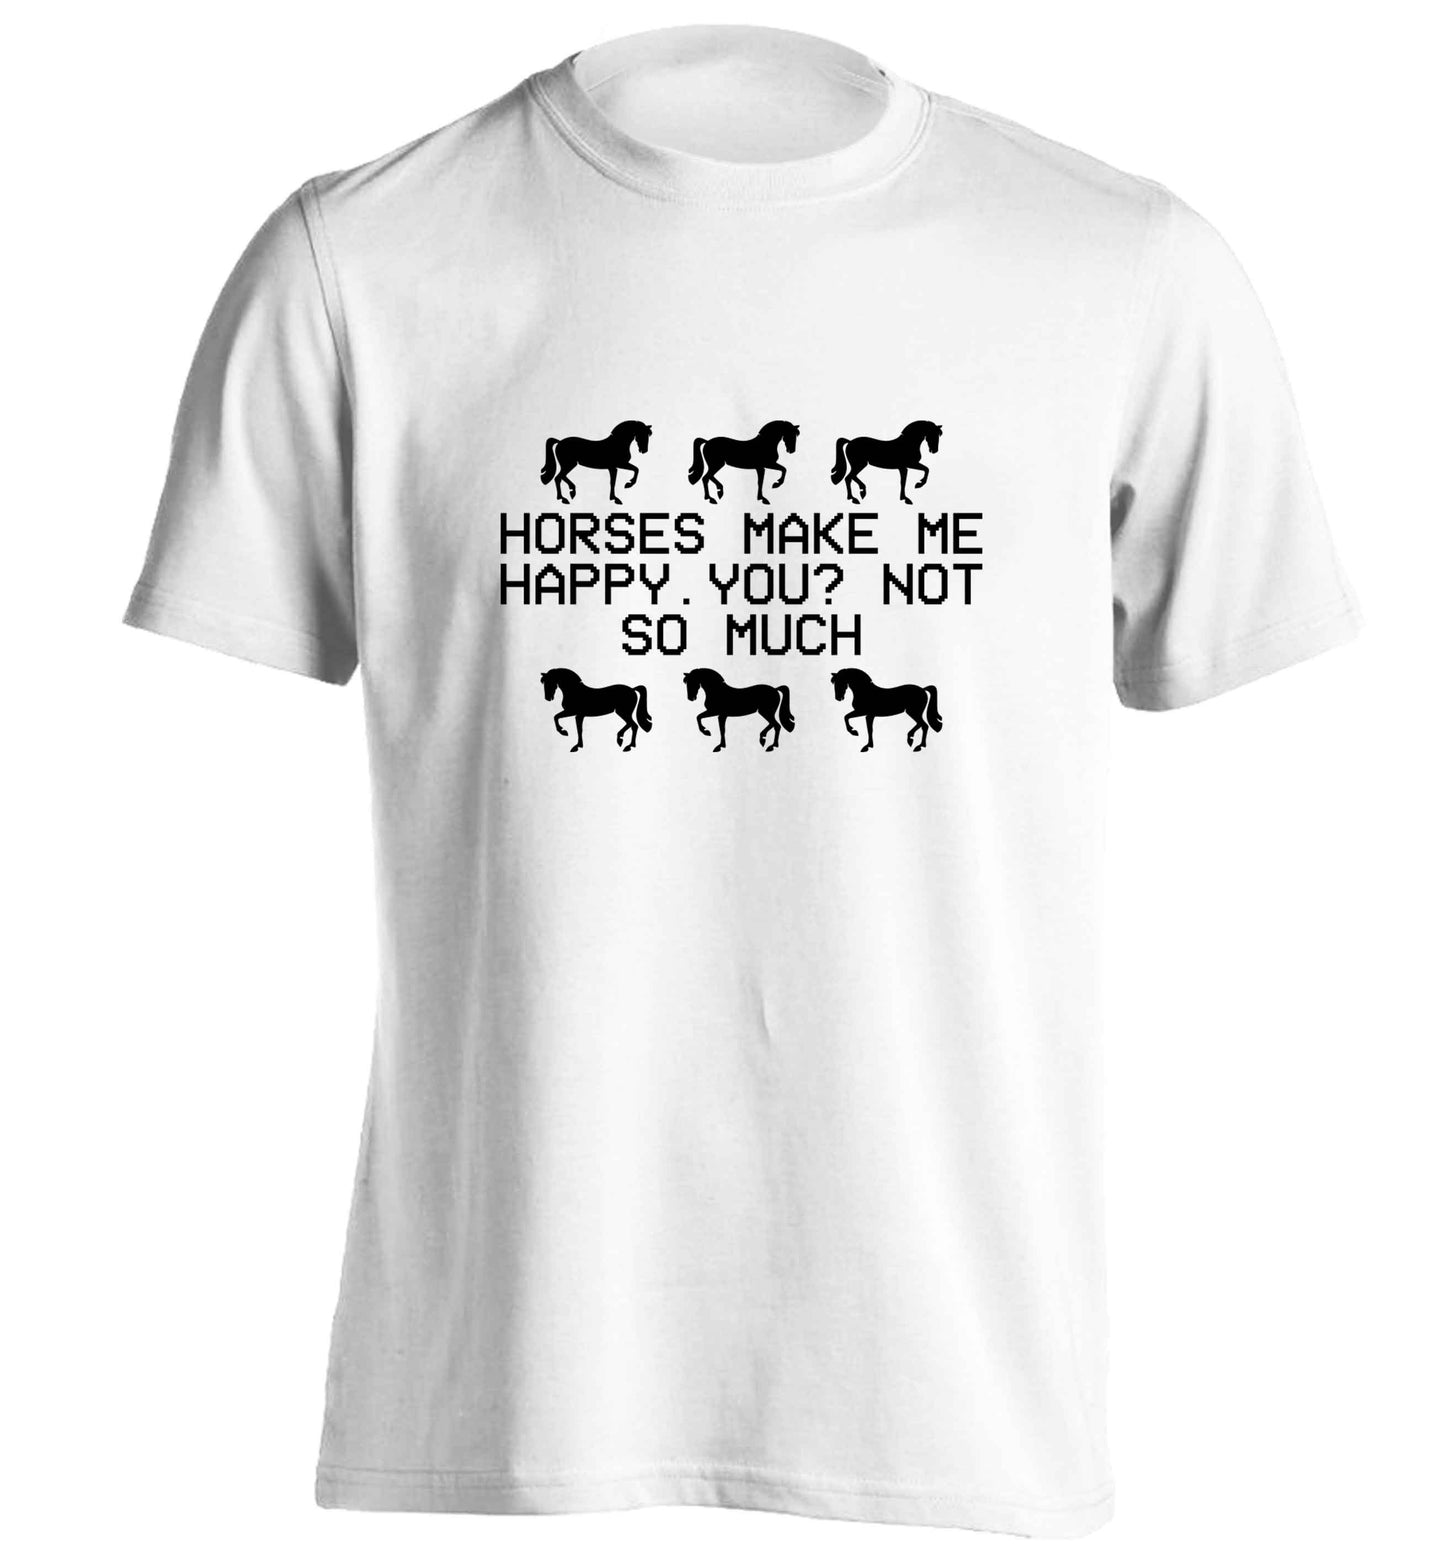 Horses make me happy, you not so much adults unisex white Tshirt 2XL